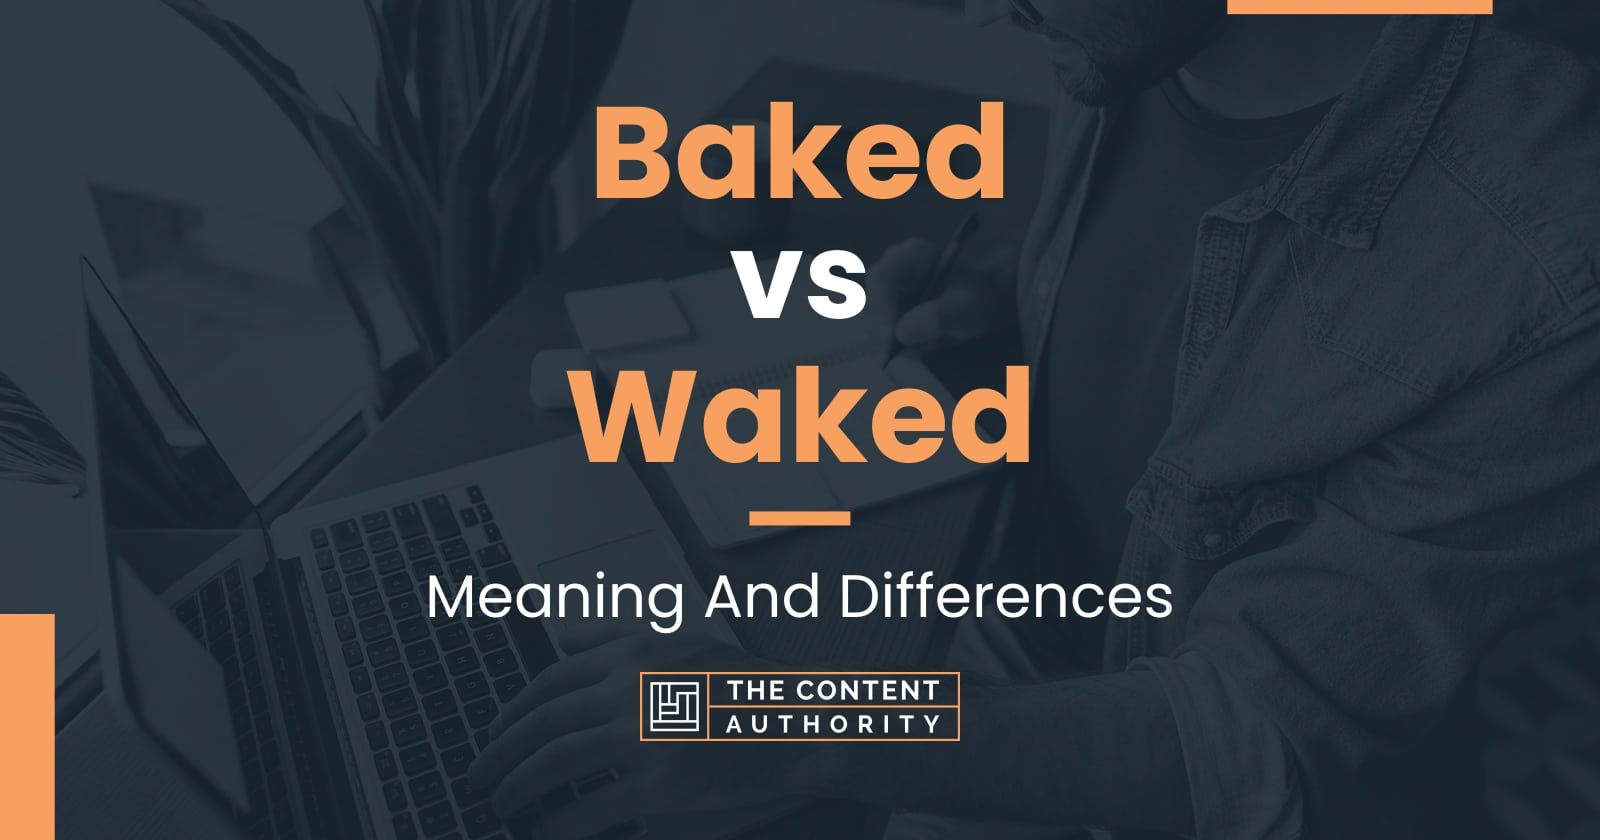 Baked vs Waked: Meaning And Differences